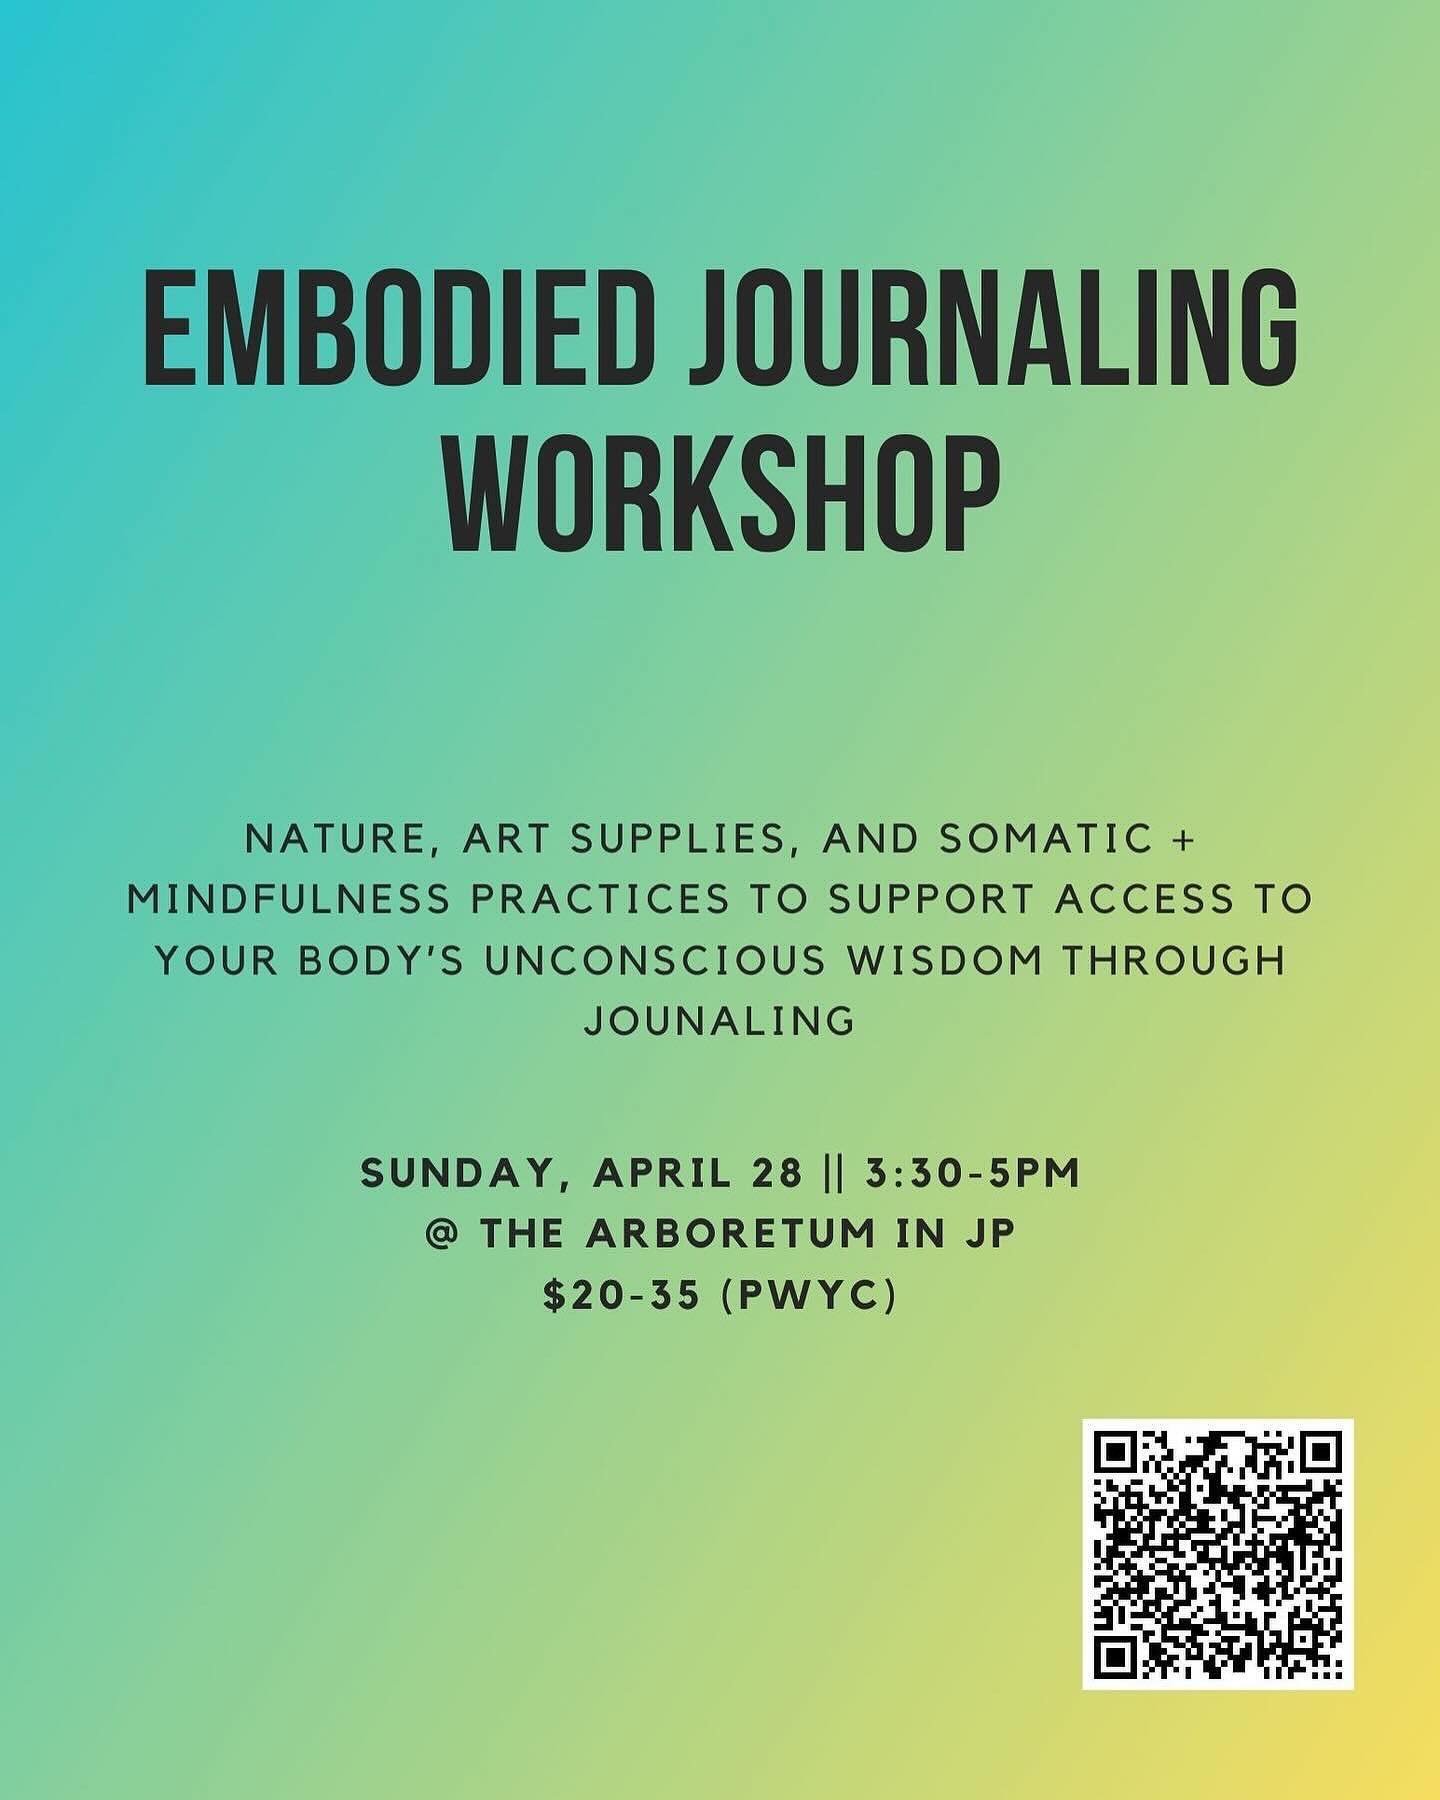 Embodied journaling workshop this Sunday at the arb! It&rsquo;s gonna be 70 and beautiful 🥹 excited to play and make space for the feels and journal in nature together&hellip; tickets in bio!

+ some sweet words from dear ones, these sorts of affirm